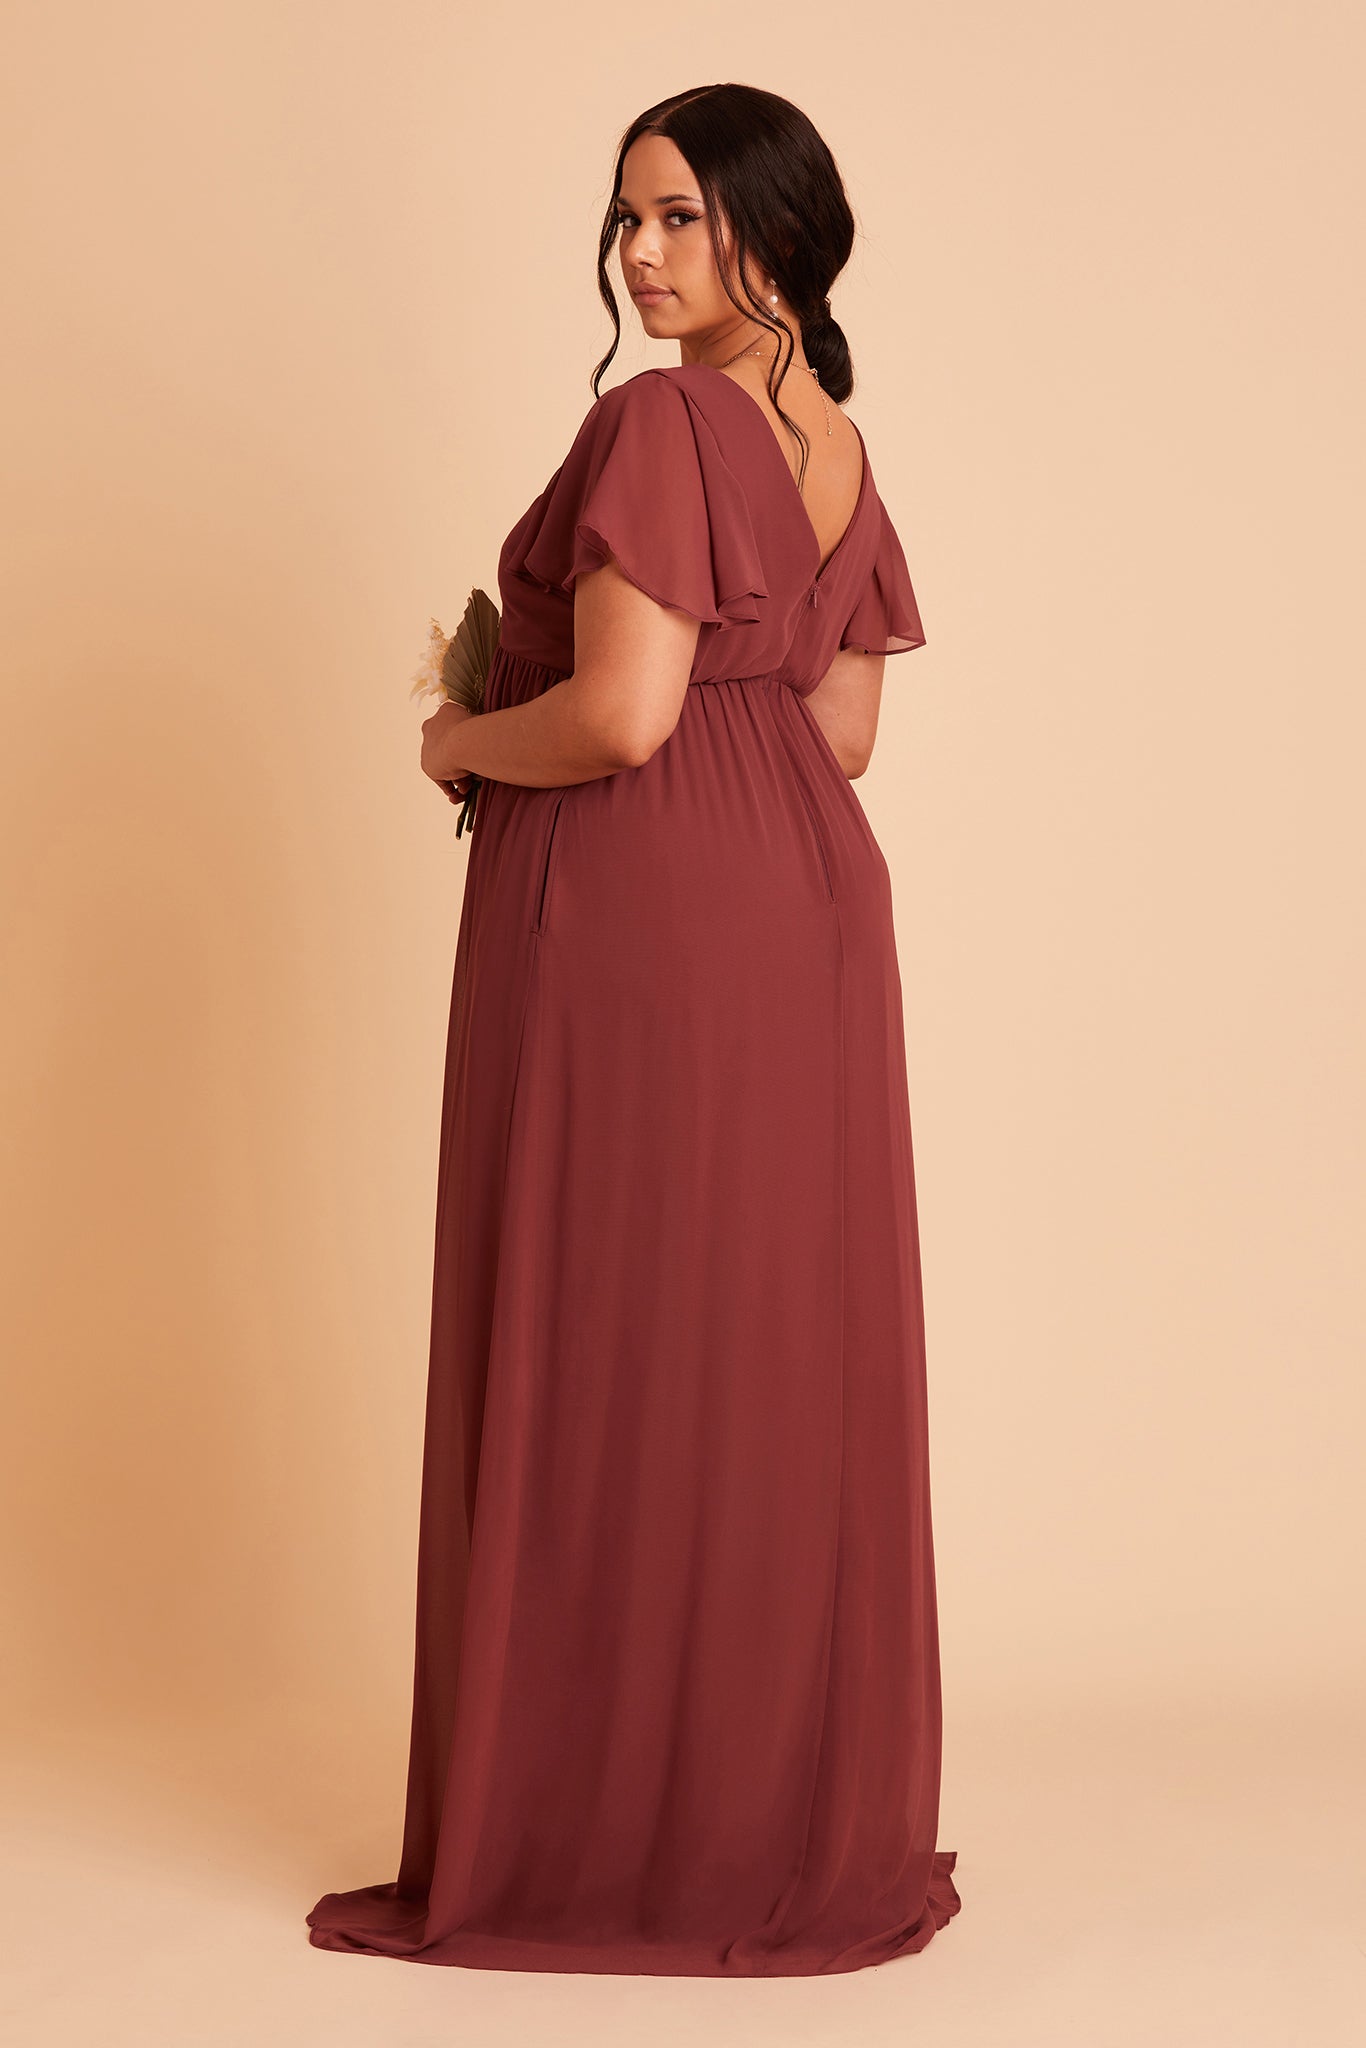 Hannah empire plus size bridesmaid dress in rosewood chiffon by Birdy Grey, side view